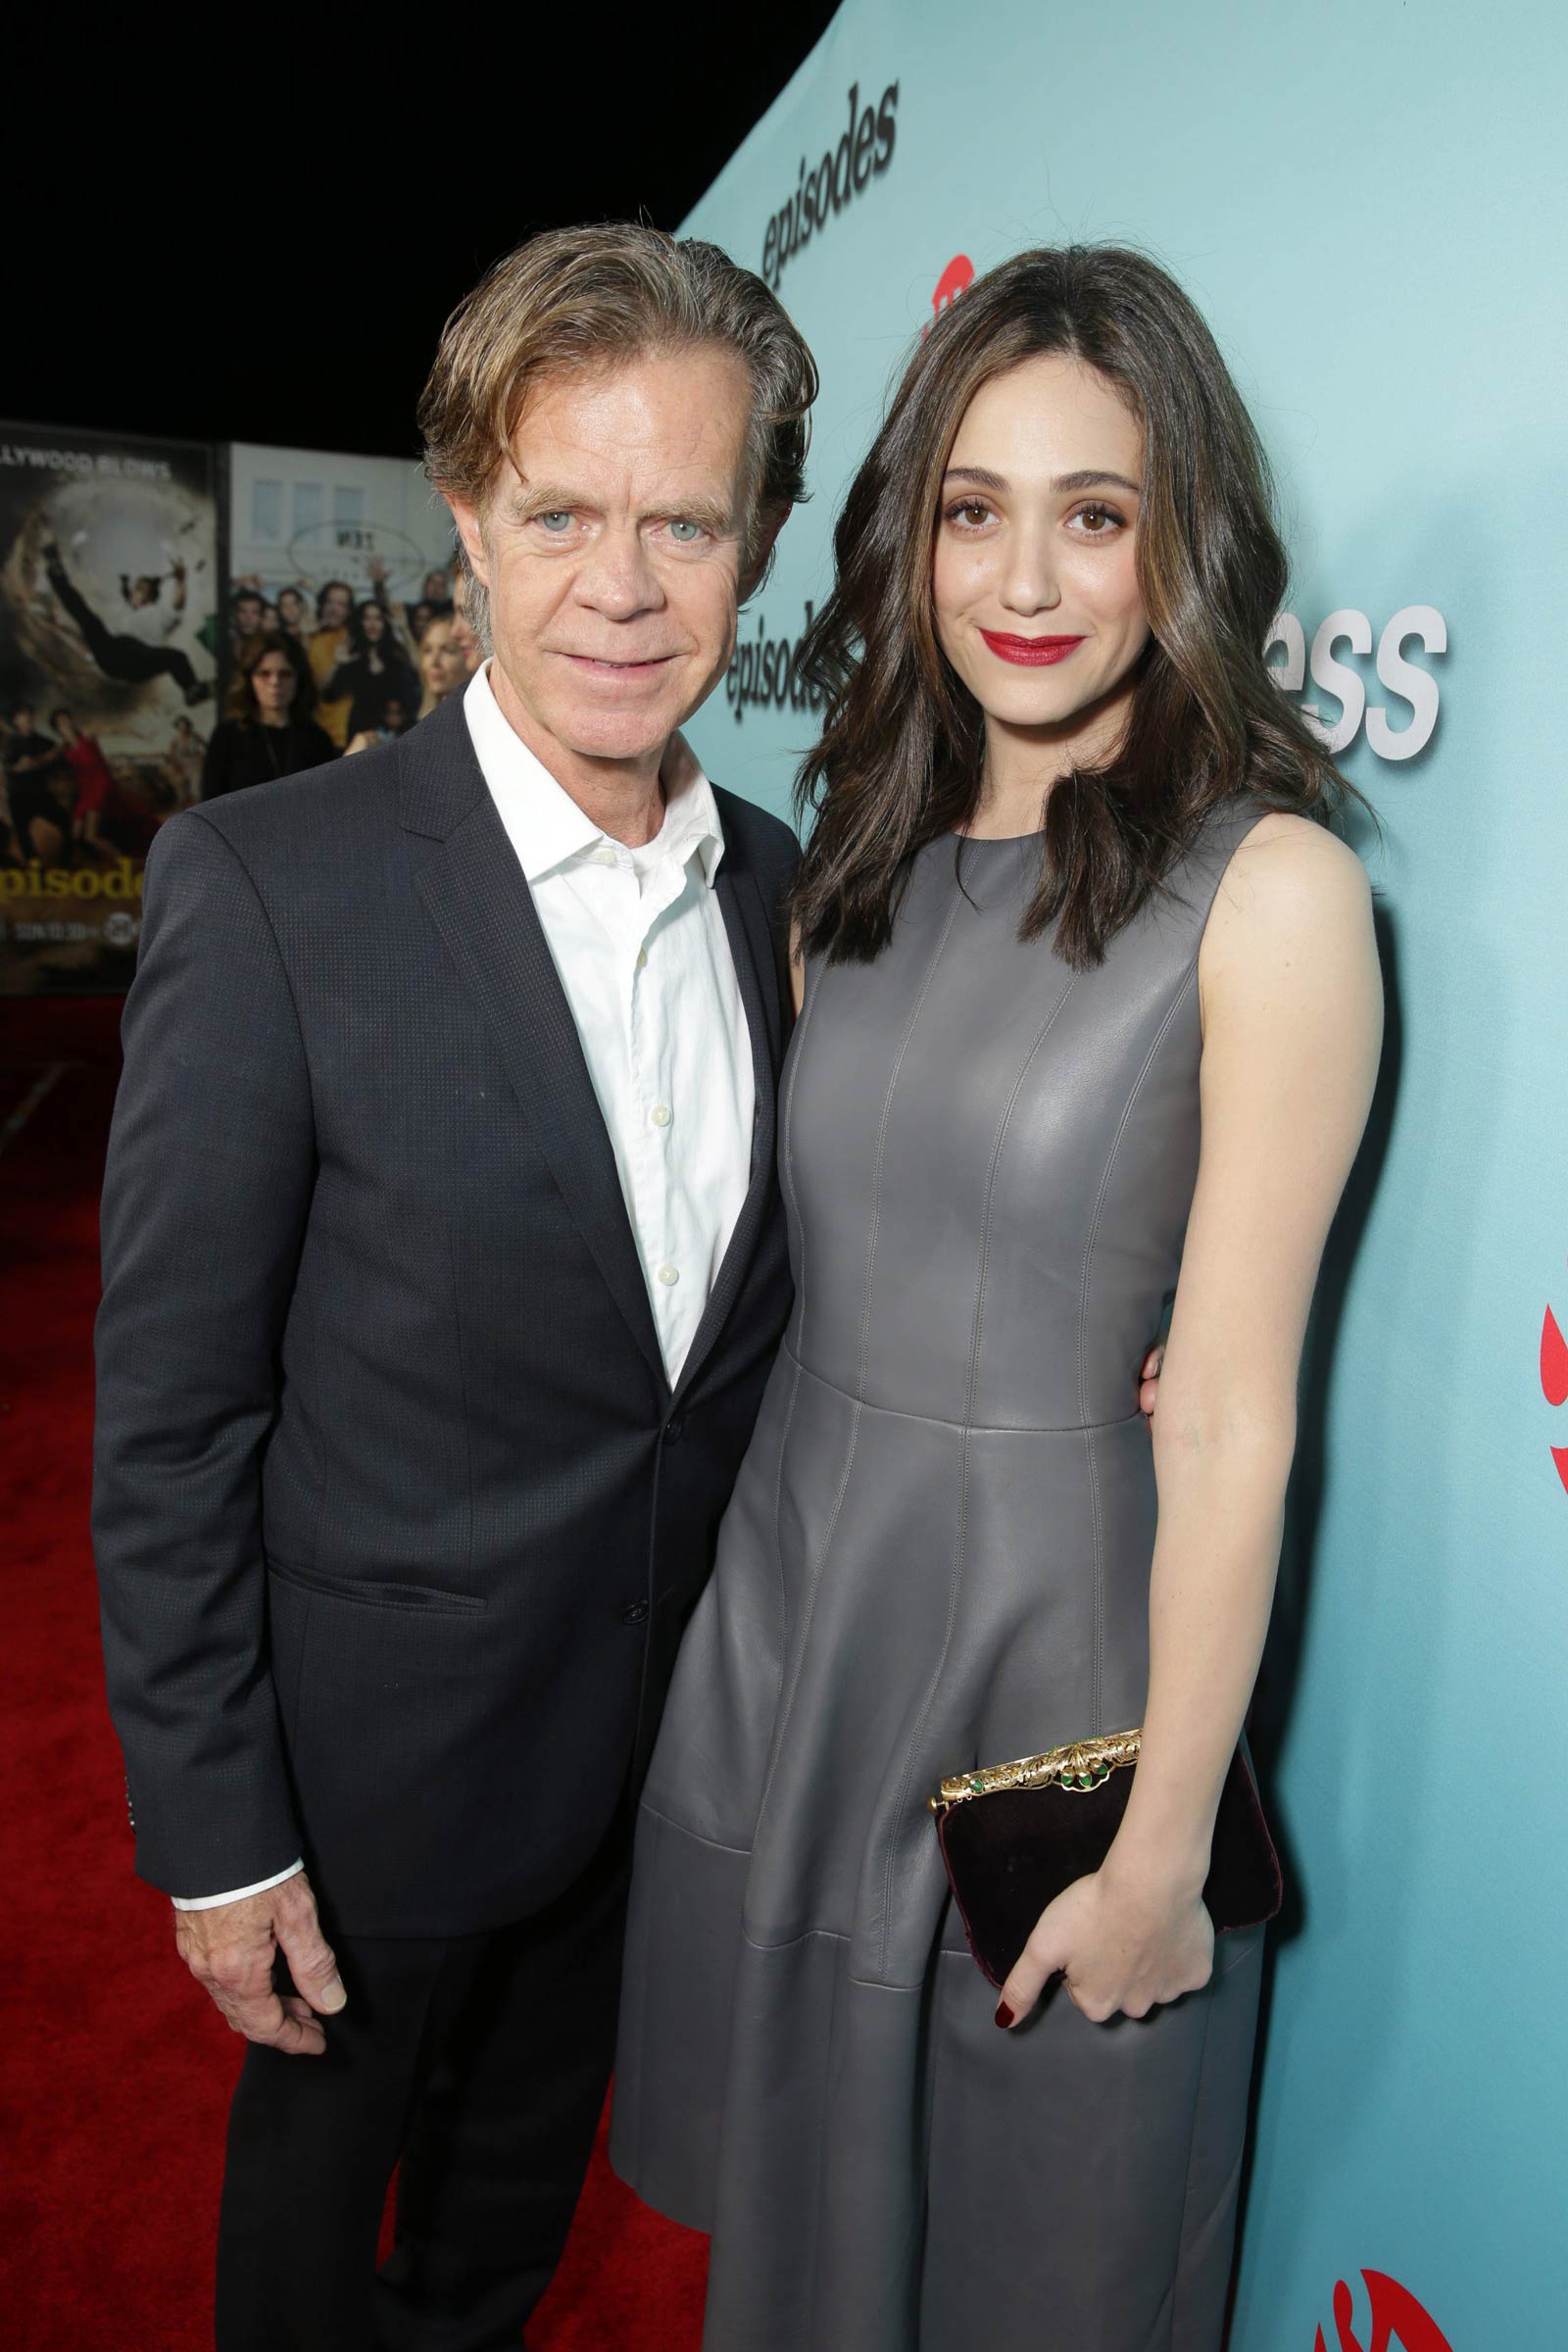 Emmy Rossum attends the Showtime celebration of the all-new seasons of Shameless